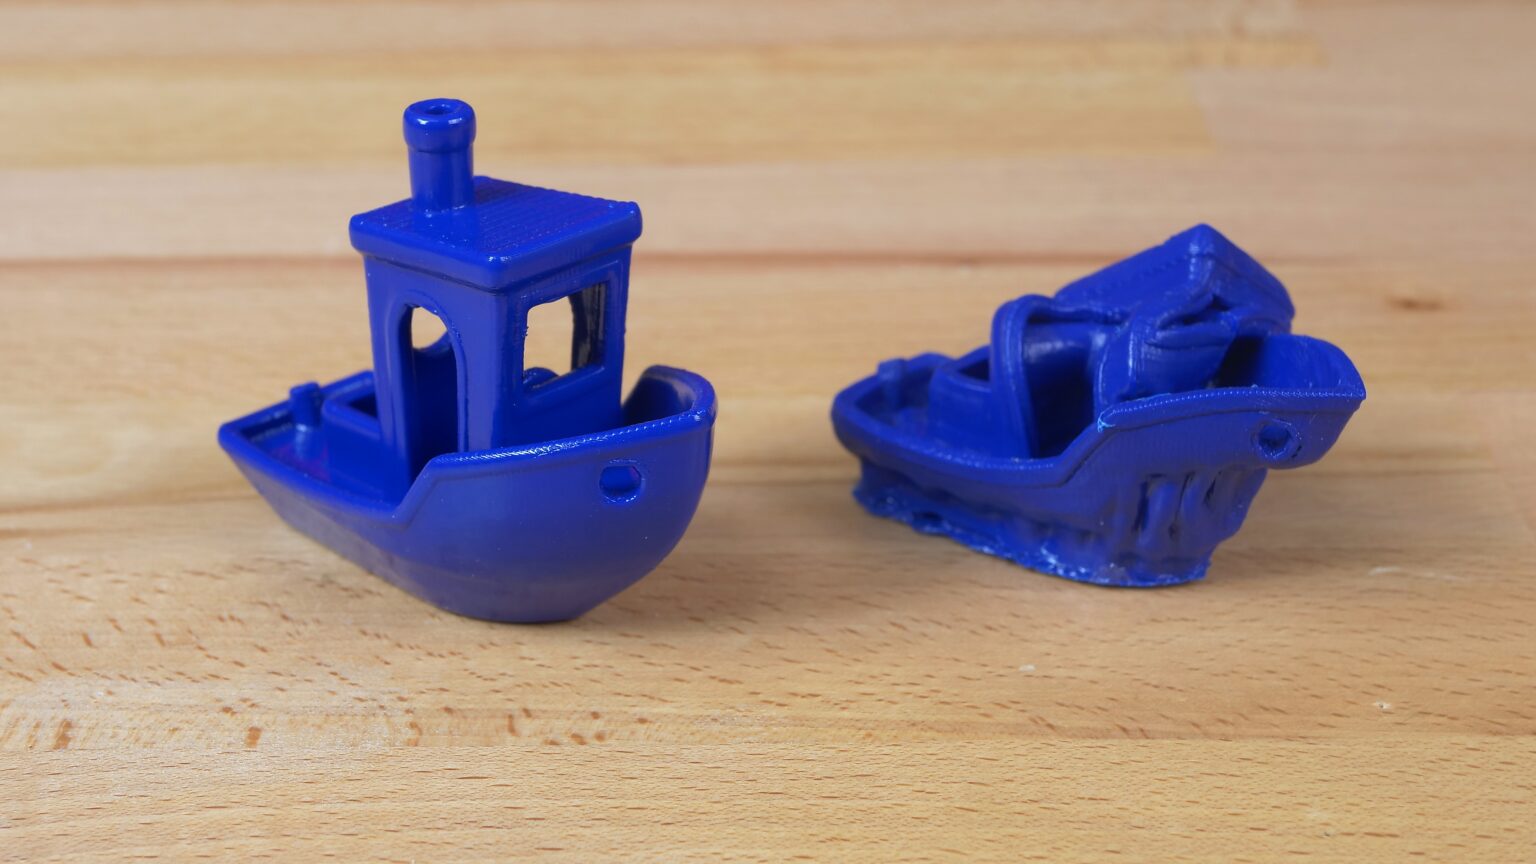 PLA melt down with acetone to unclog printer nozzle